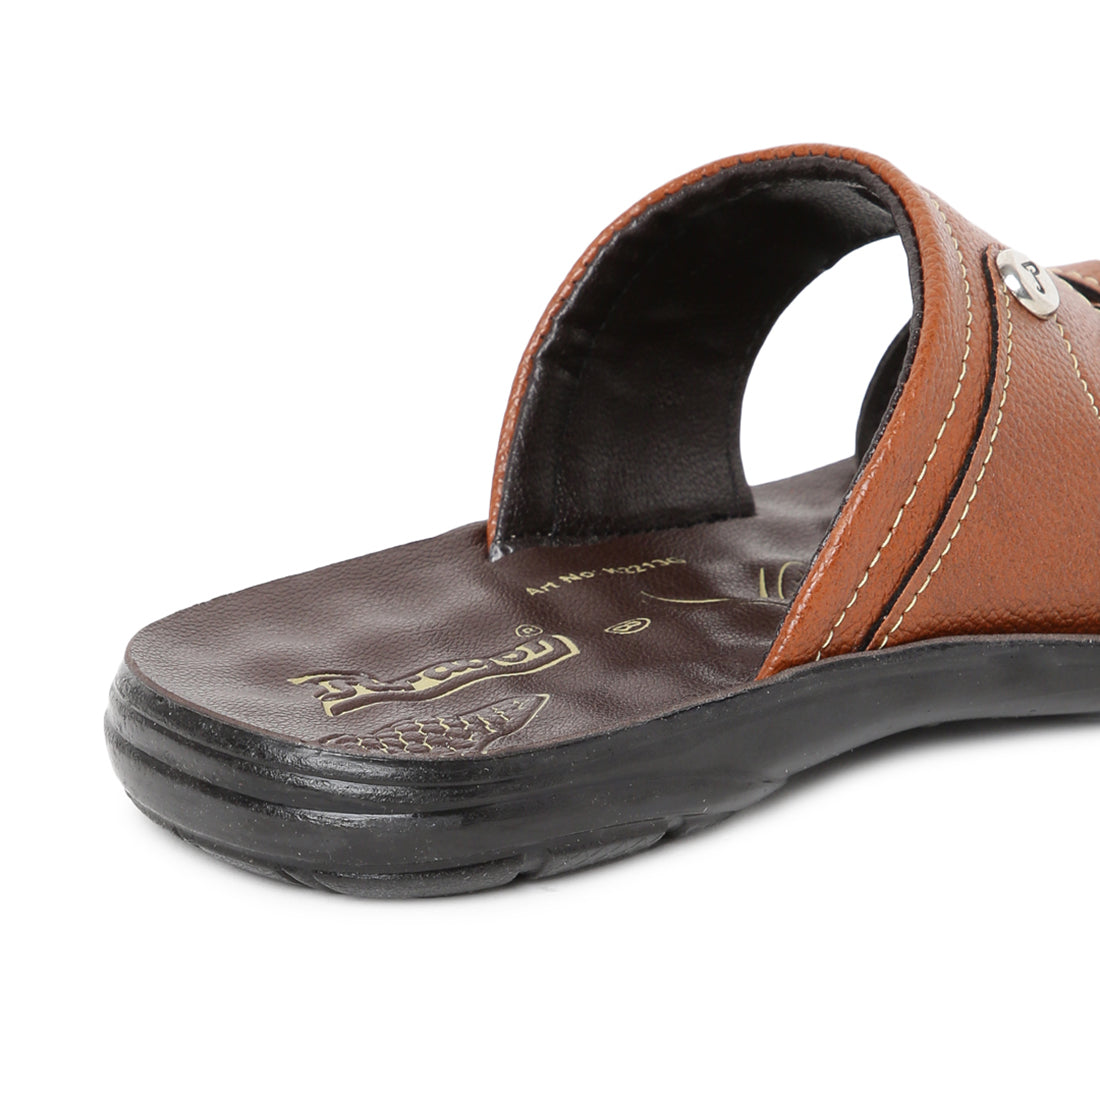 Paragon  PUK2213G Men Stylish Sandals | Comfortable Sandals for Daily Outdoor Use | Casual Formal Sandals with Cushioned Soles